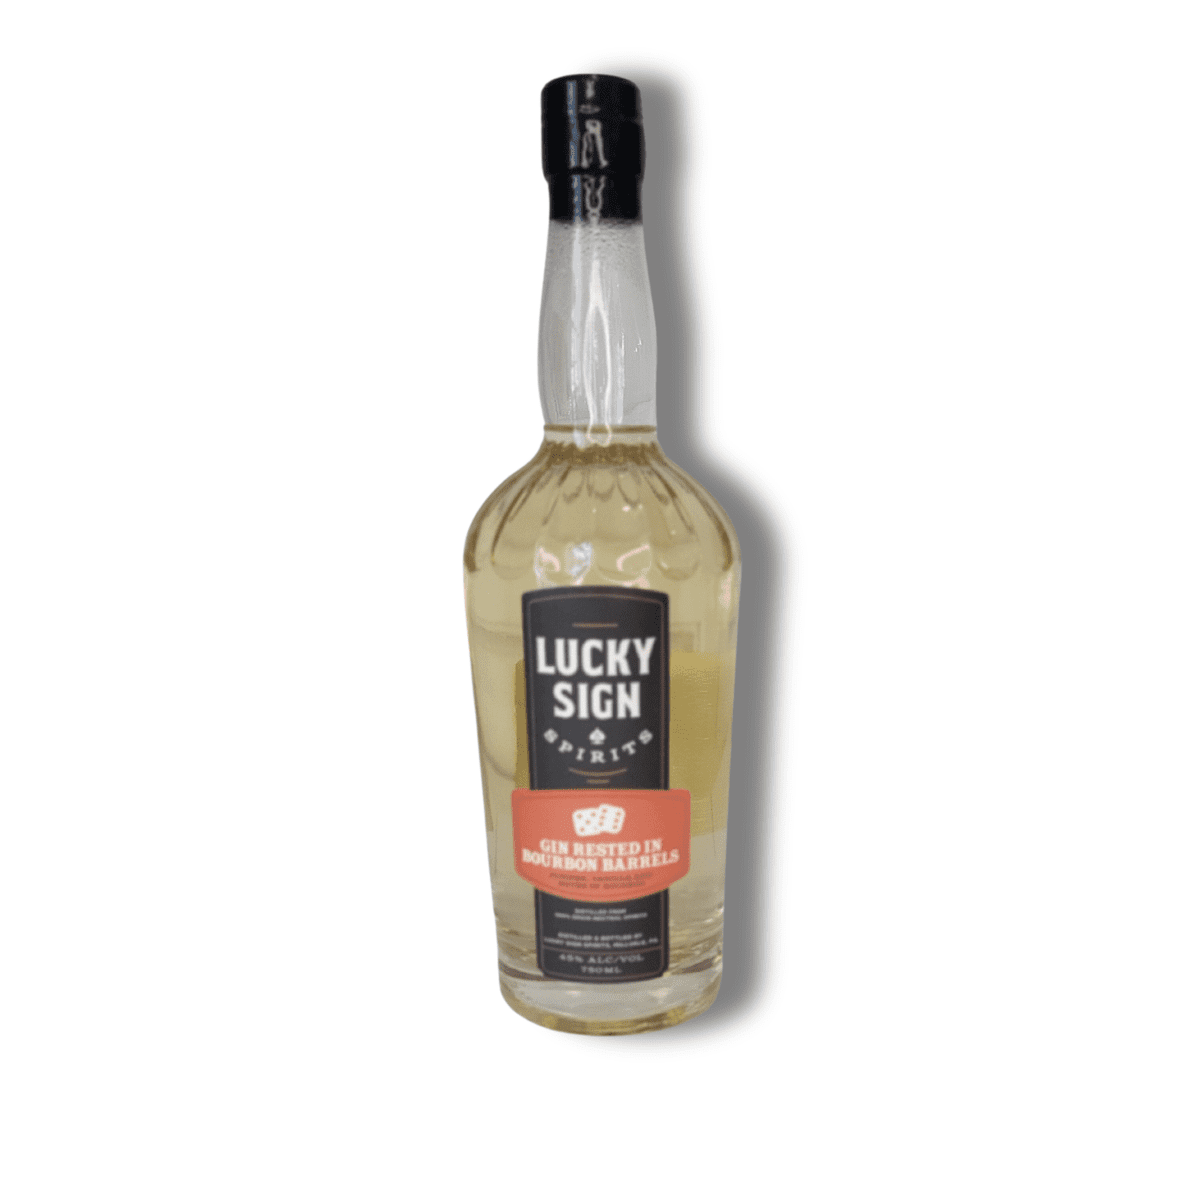 Lucky Sign - Gin Rested in Bourbon Barrels - 750mL Bottle